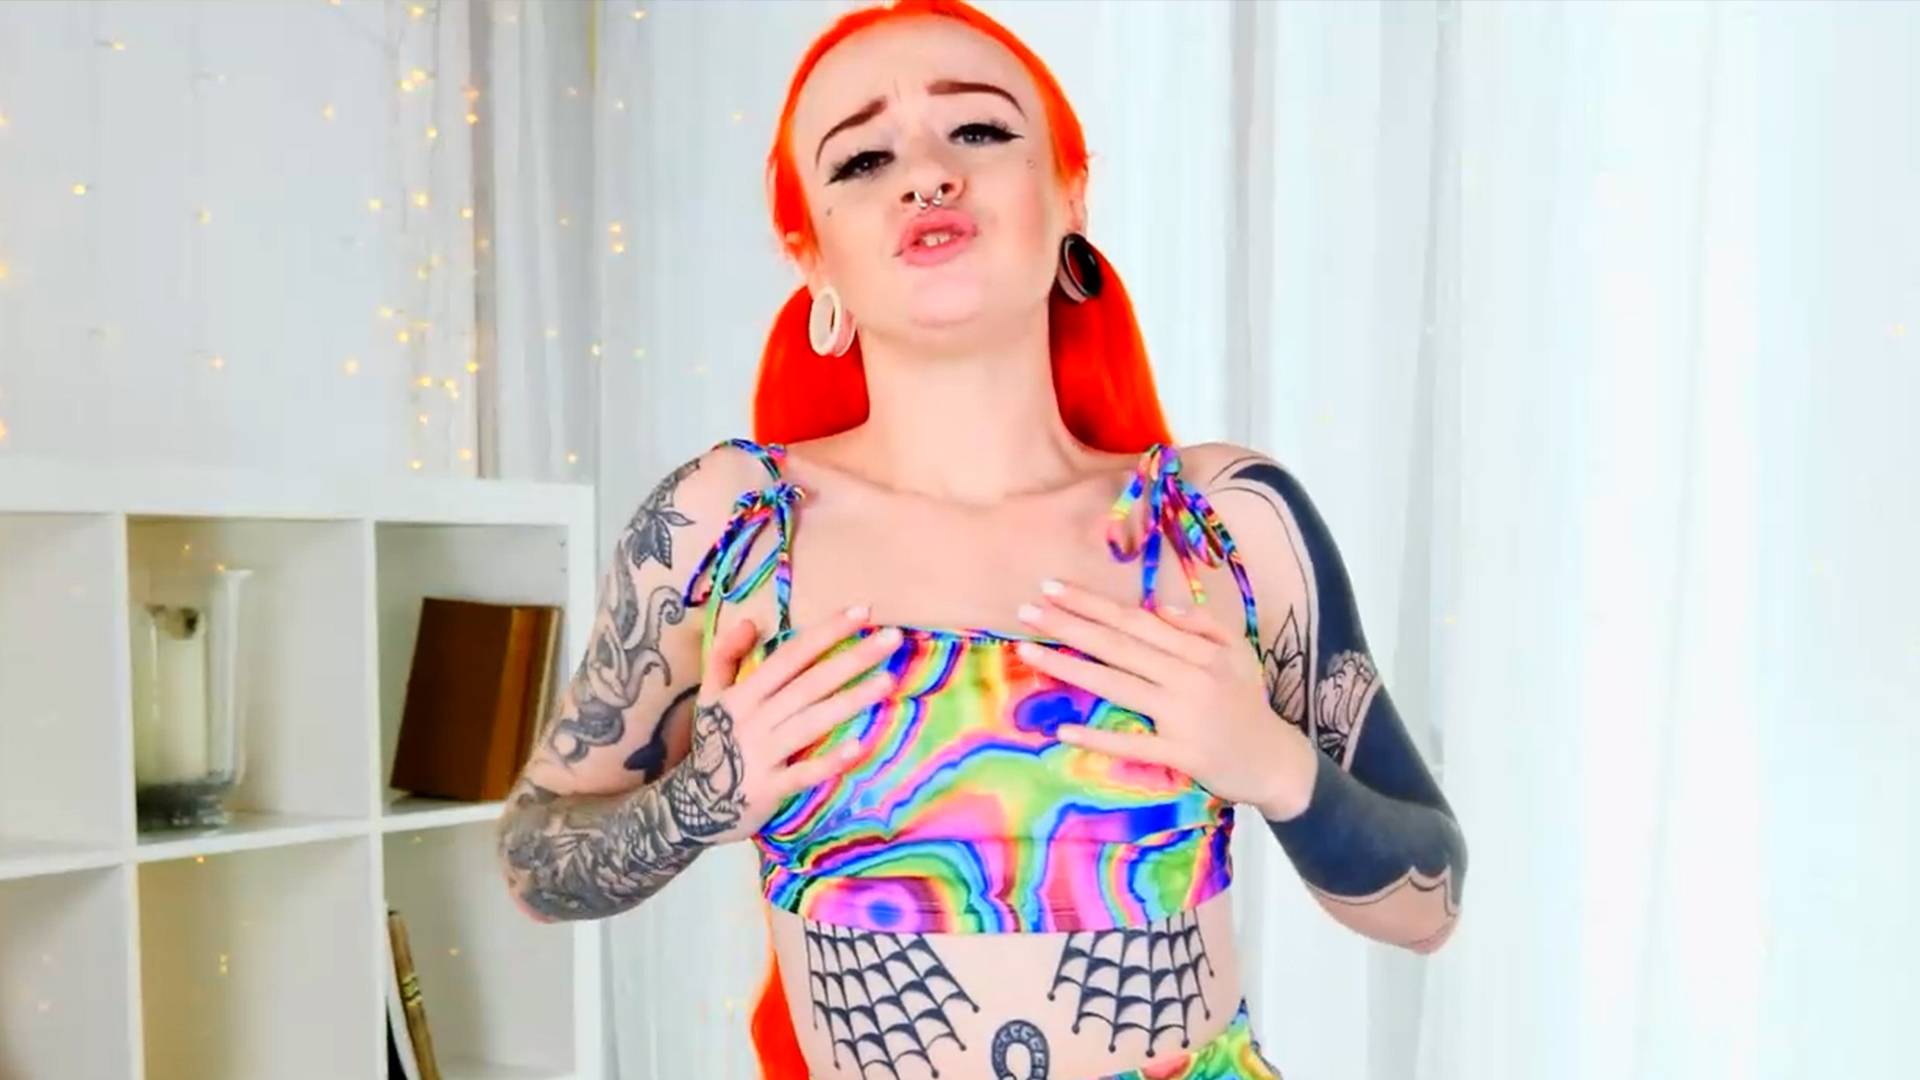 Azura Alii is one wild babe with a big ass who'll do anything to please you. Join this tattooed and pierced camgirl on her cam show today!